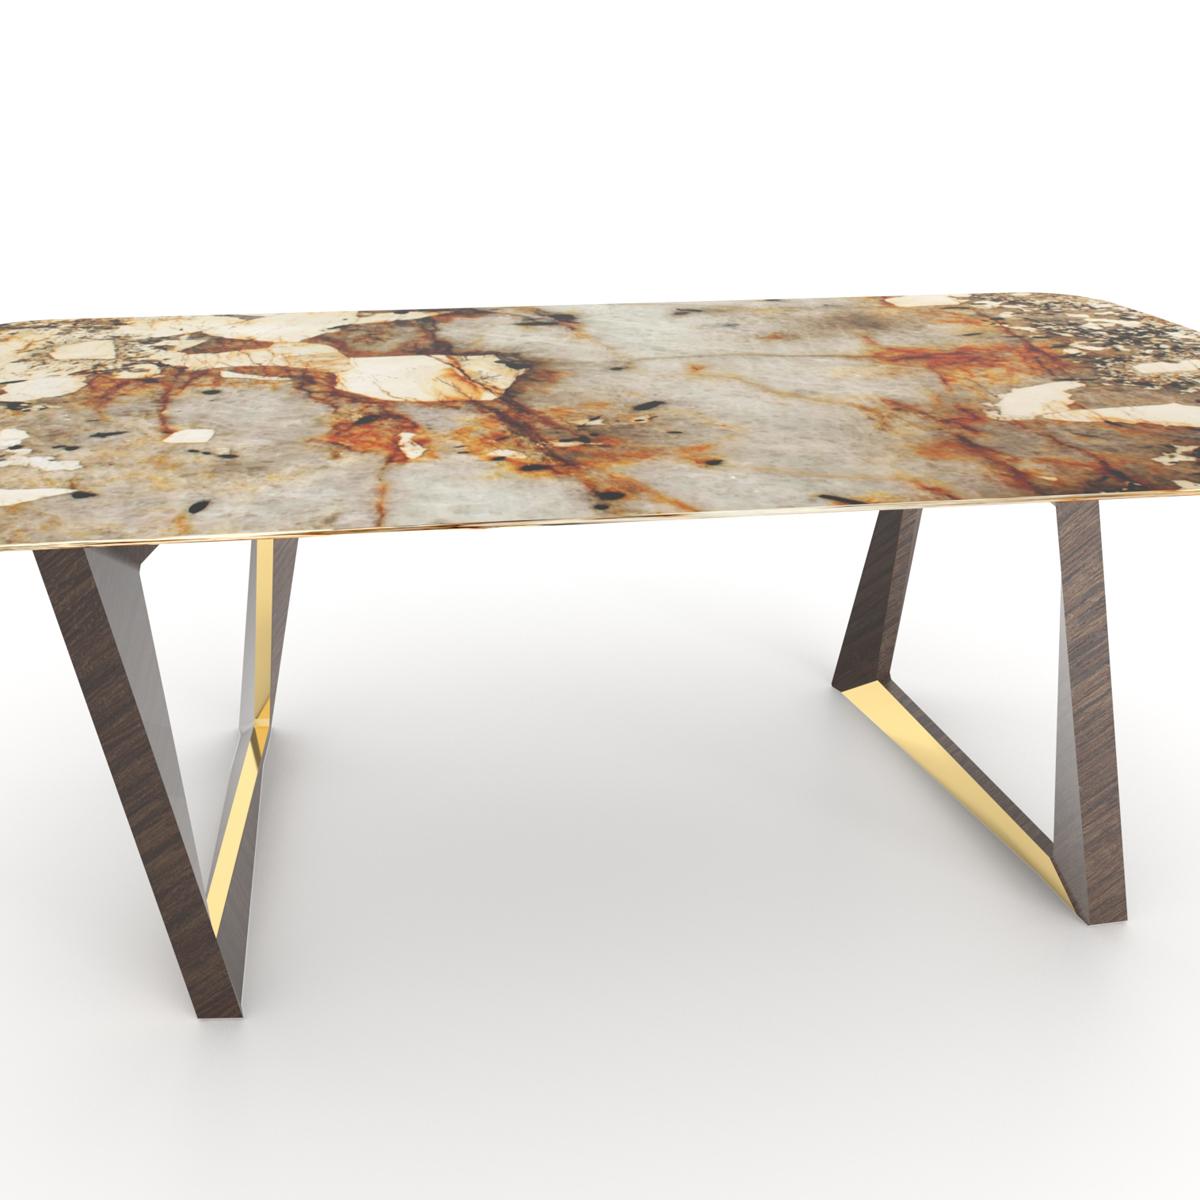 Dinning table calypso with polished Patagonia granite top
and with LED lighting included. With base in solid beech
wood in high gloss dark or brown finish and with golden
metallic inside feet base. Limited edition of 5 pieces.

  